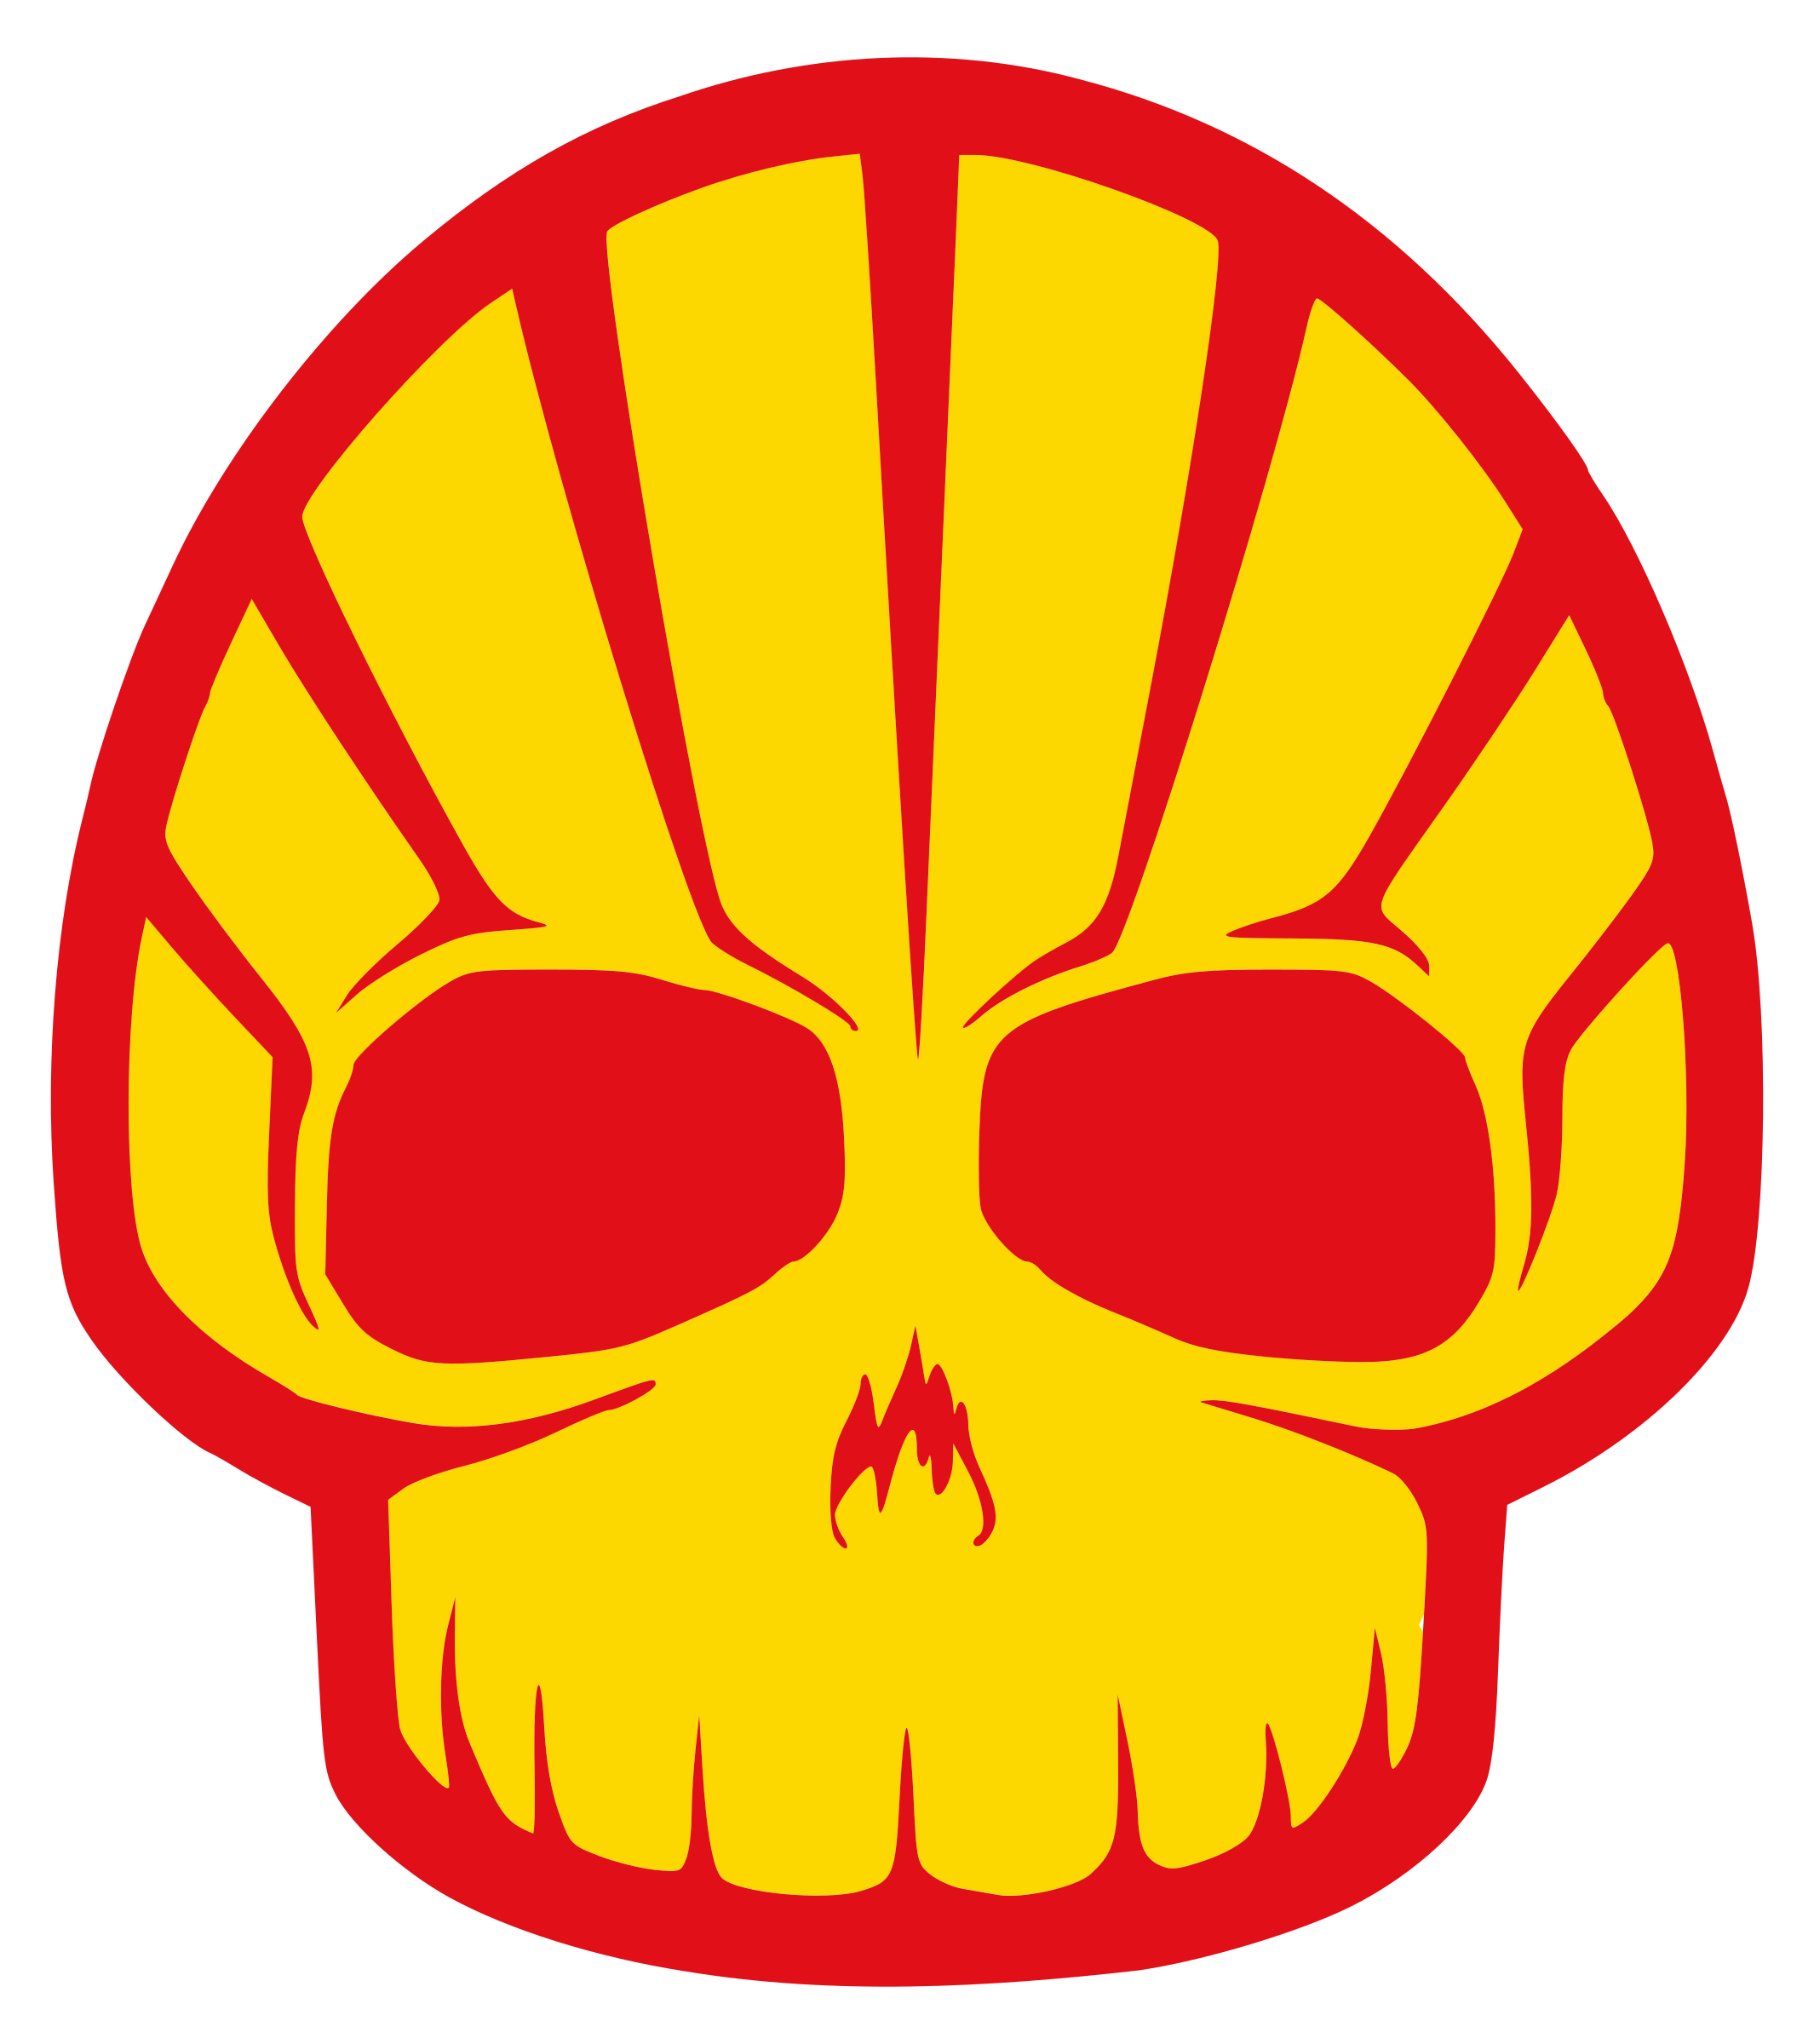 Big image png. Shell clipart red clipart